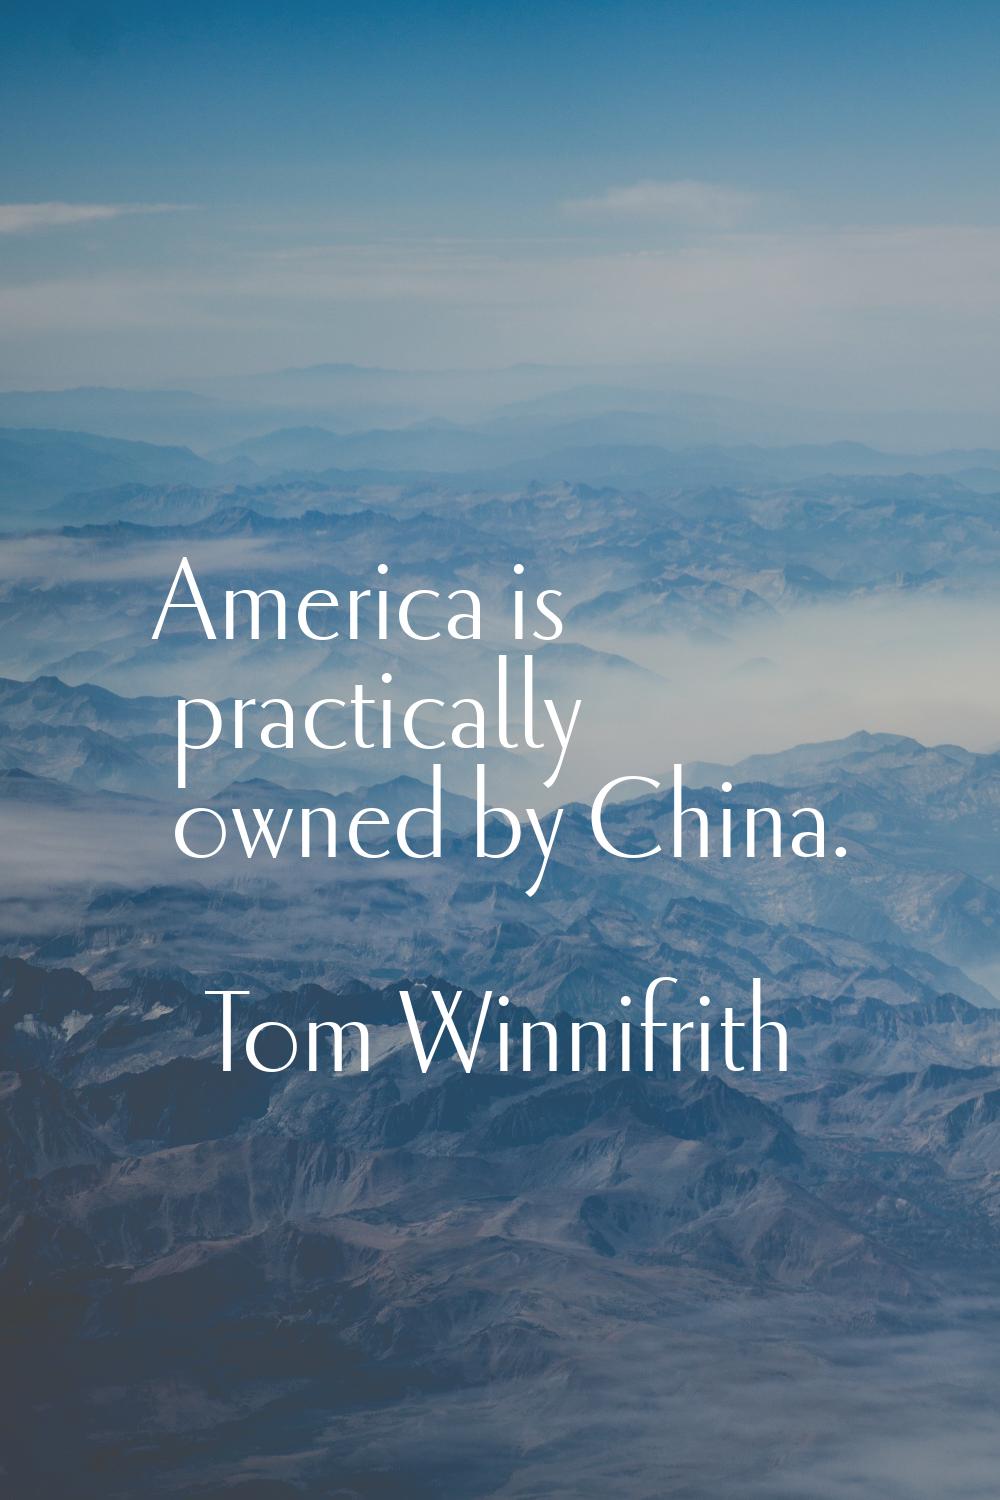 America is practically owned by China.